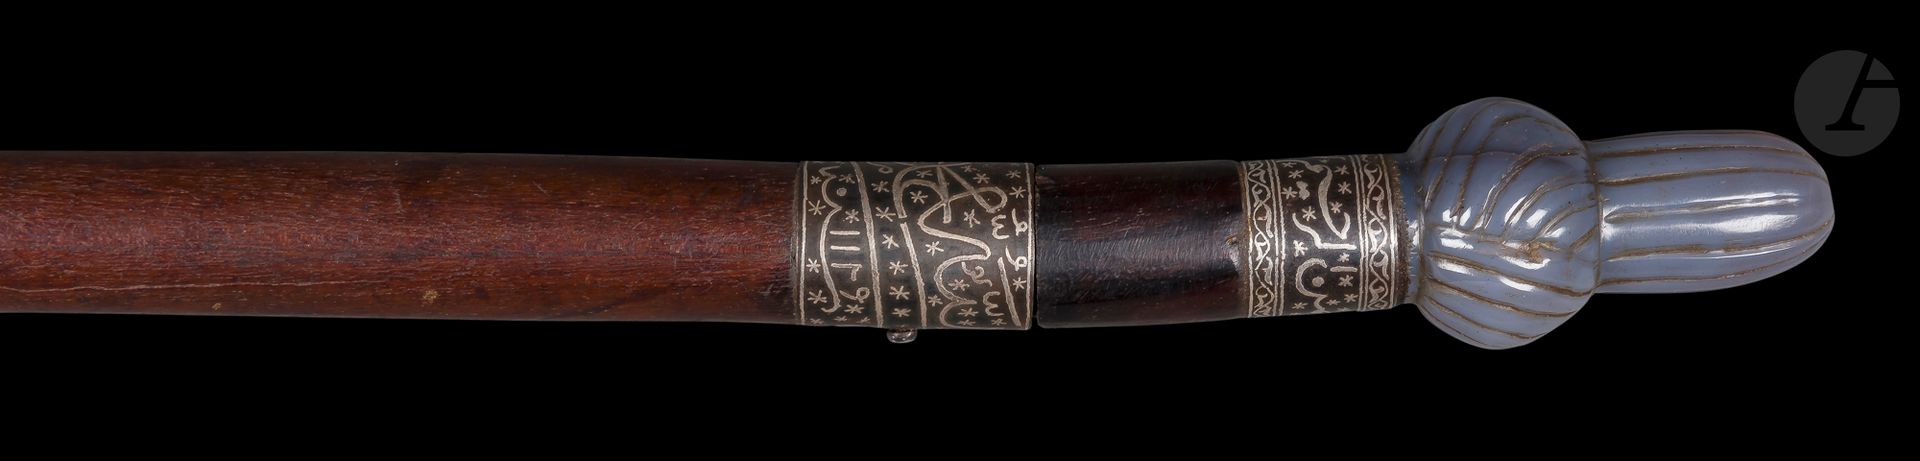 Null Sword cane, Ottoman Empire, dated 1129 H / 1716
Wooden cylindrical body wit&hellip;